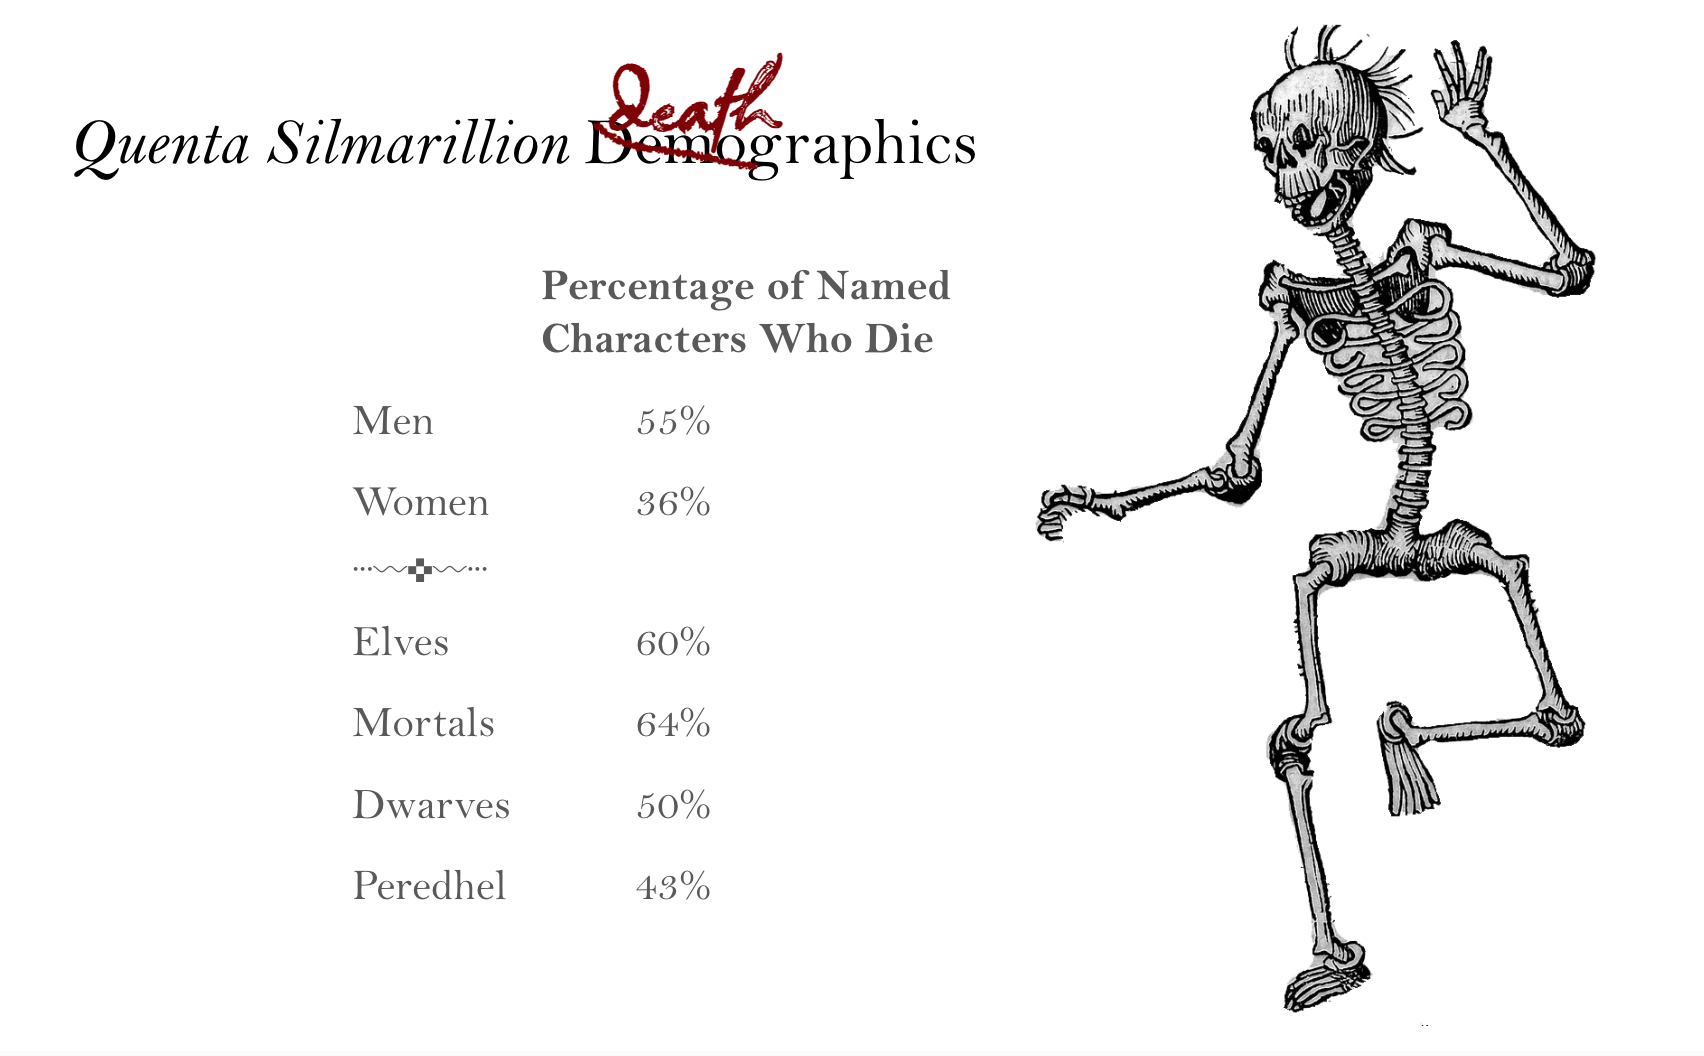 Quenta Silmarillion Death Demographics as Percentage of Named Characters Who Die: Men: 55%. Women: 36%. Elves: 60%. Mortals: 64%. Dwarves: 50%. Peredhel: 43%.